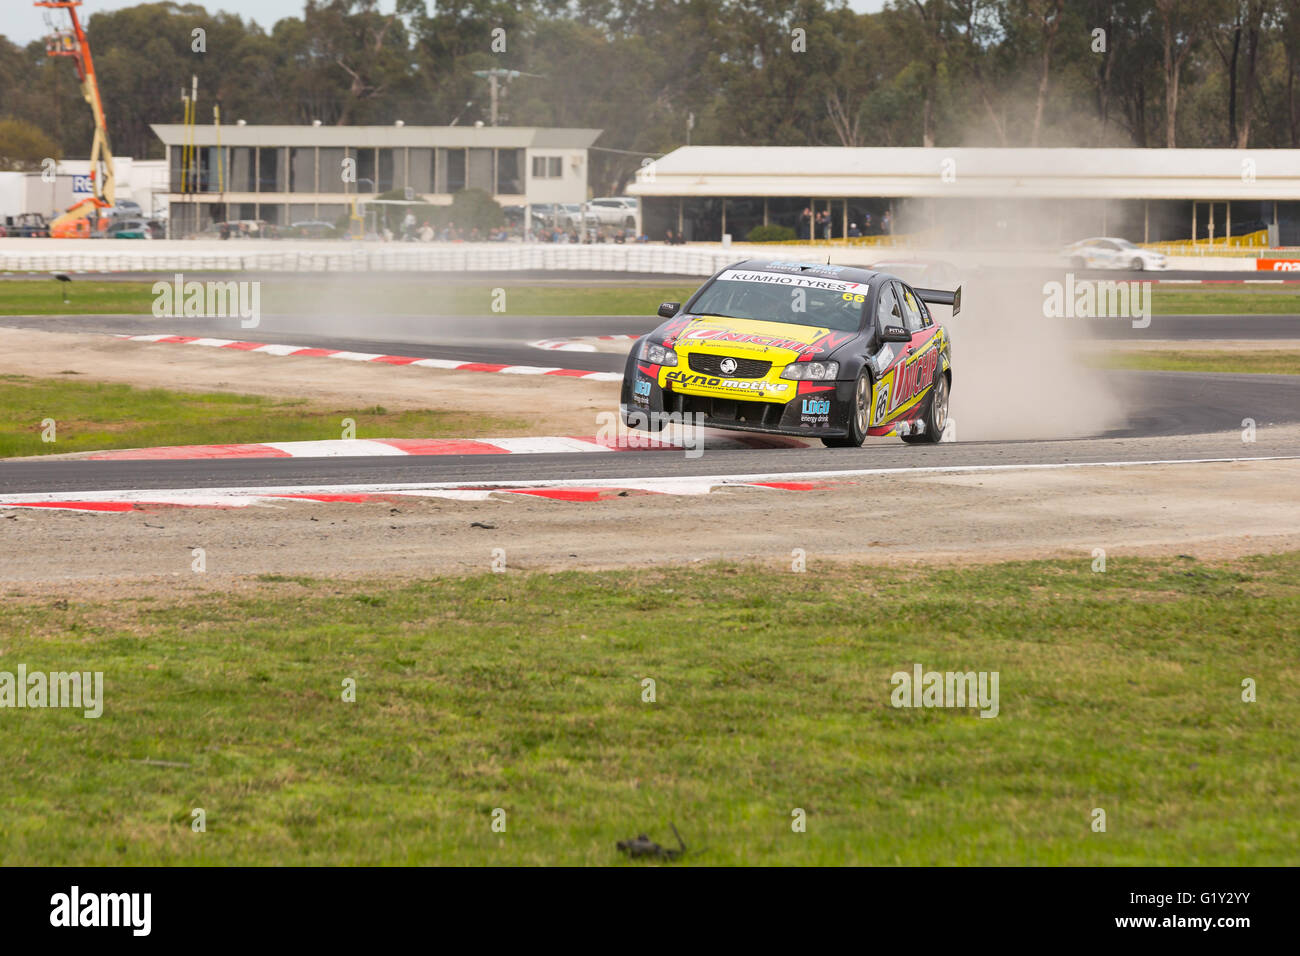 MELBOURNE, WINTON/AUSTRALIA, 20 MAY, 2016: Jack Sipps's Holdon Commodore sees air in the Kumho Tyre Australian V8 Touring Car Series, at Winton Credit:  David Hewison/Alamy Live News Stock Photo